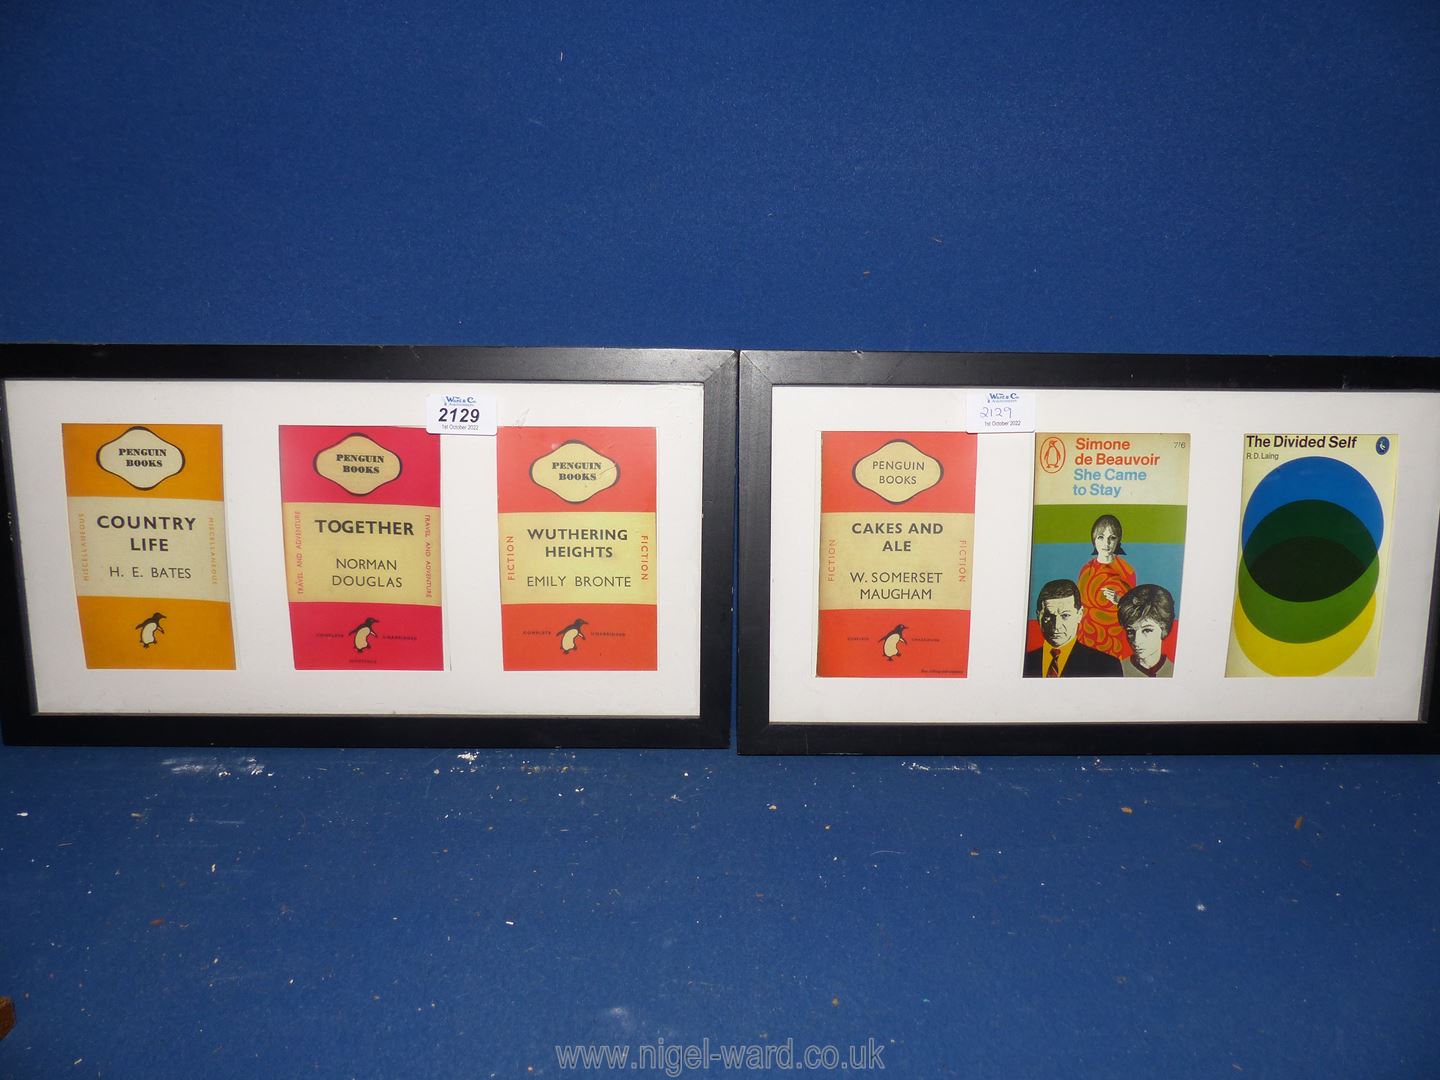 Two modern frames containing three prints taken from Penguin Book covers.